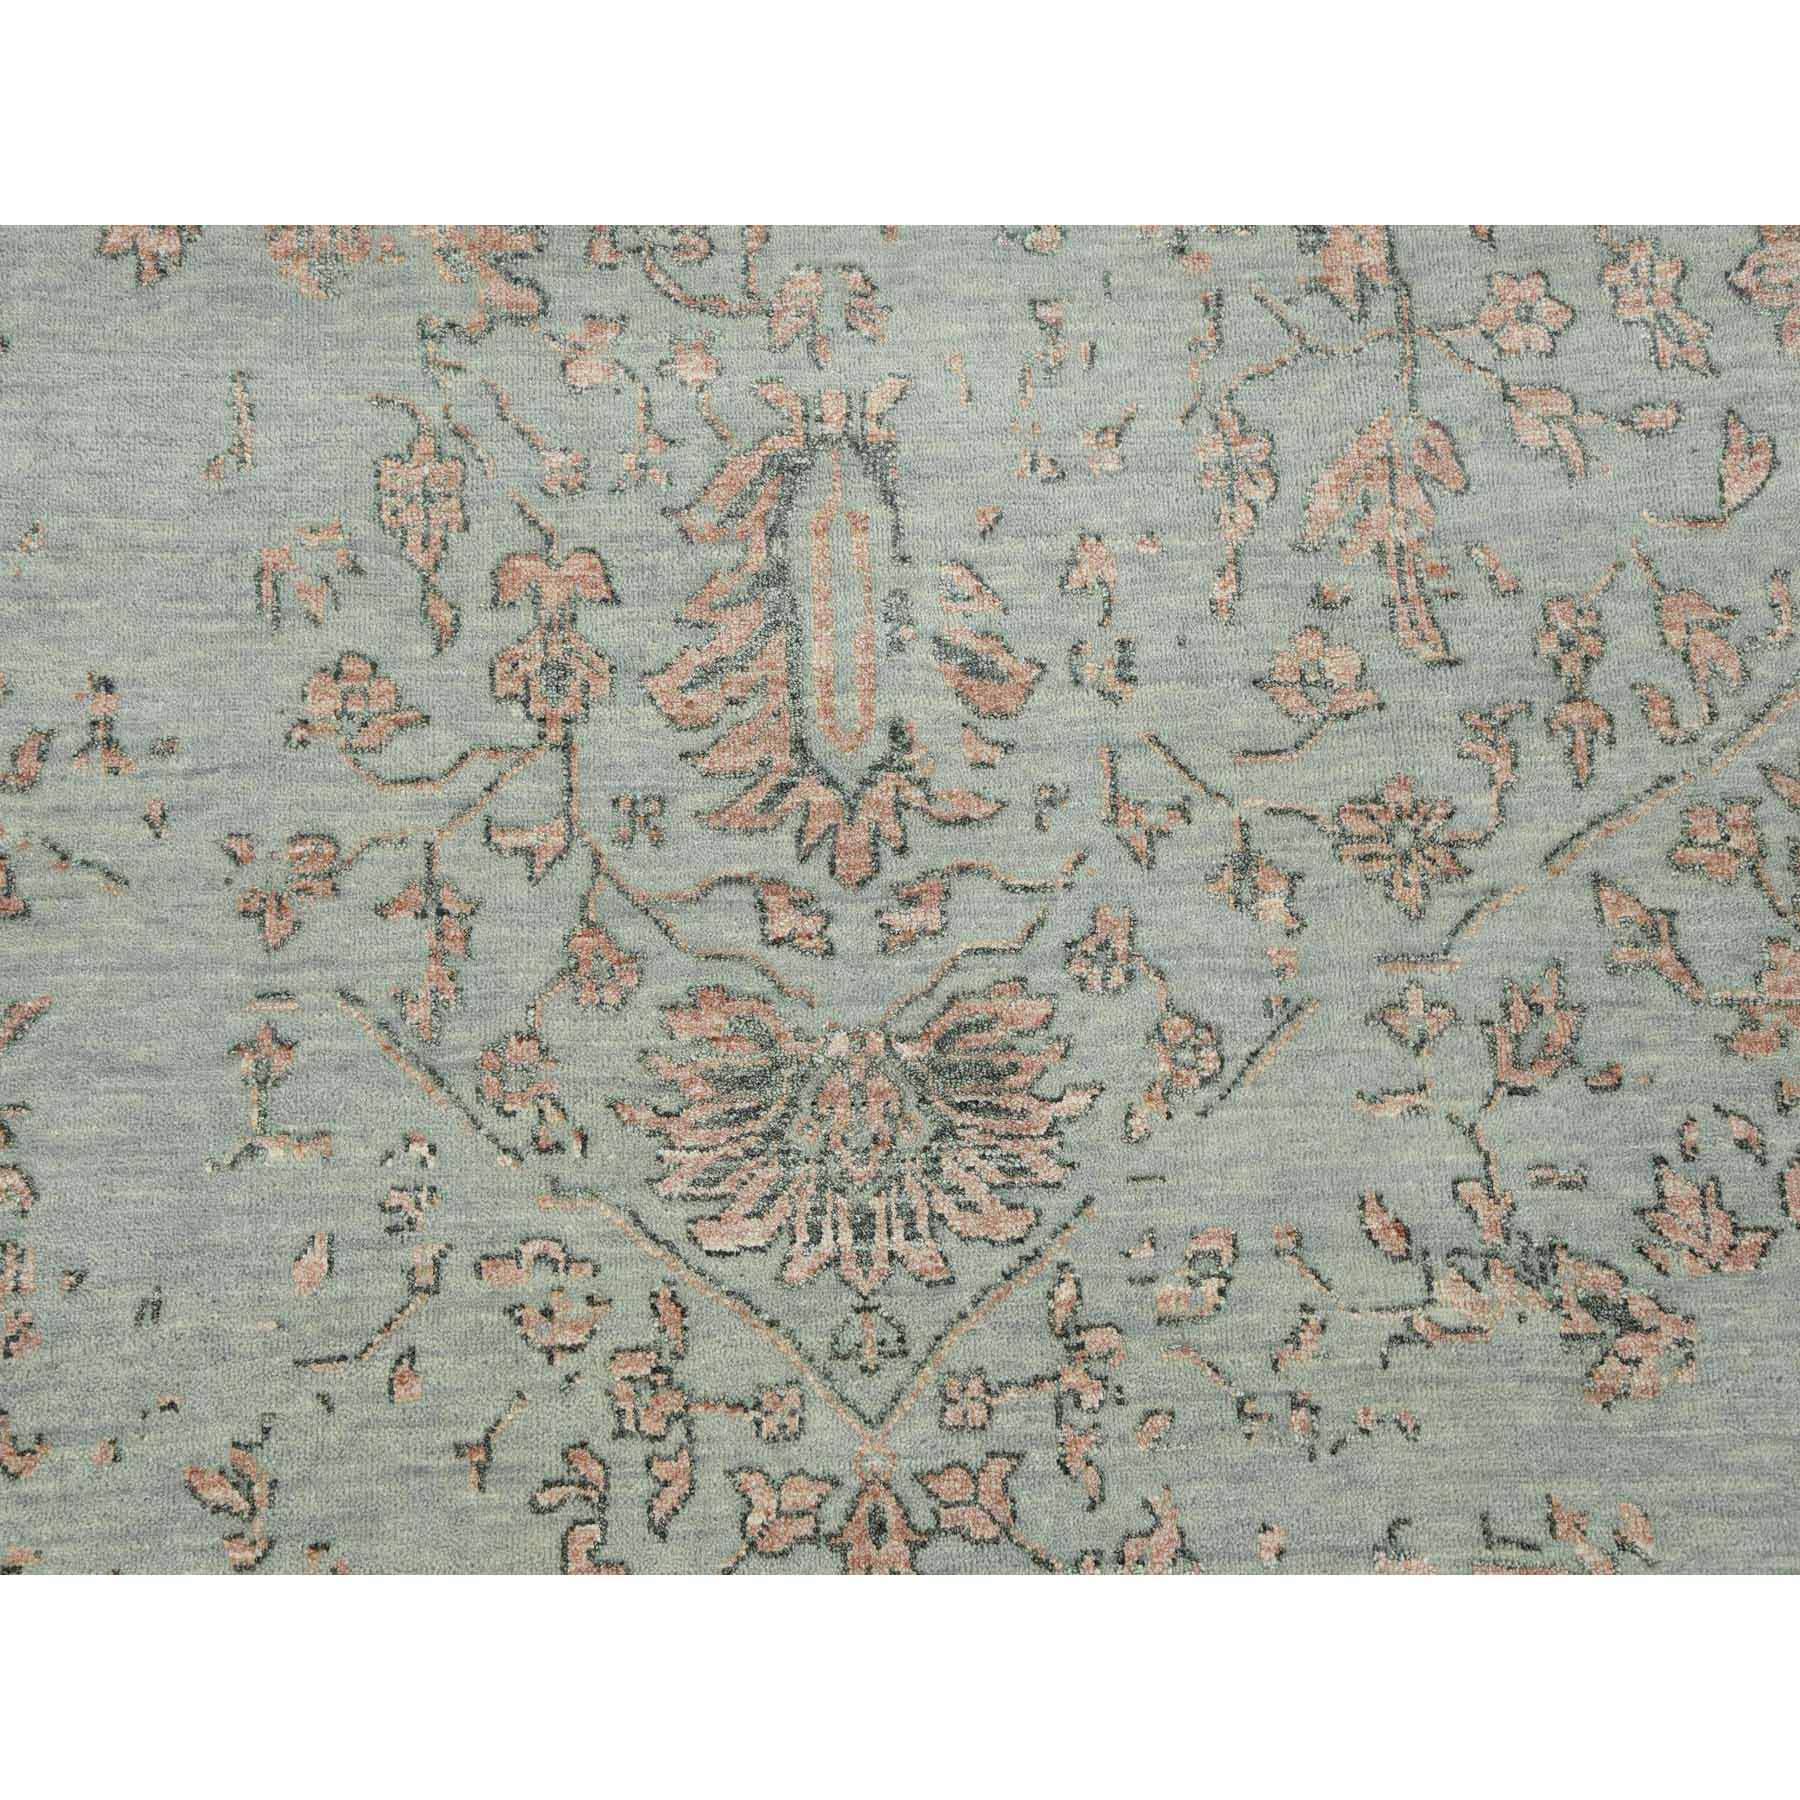 9'x12' Ash Gray with Touches of Copper, Broken Erased Persian Serapi Design, Wool and Silk Hand Woven, Oriental Rug 